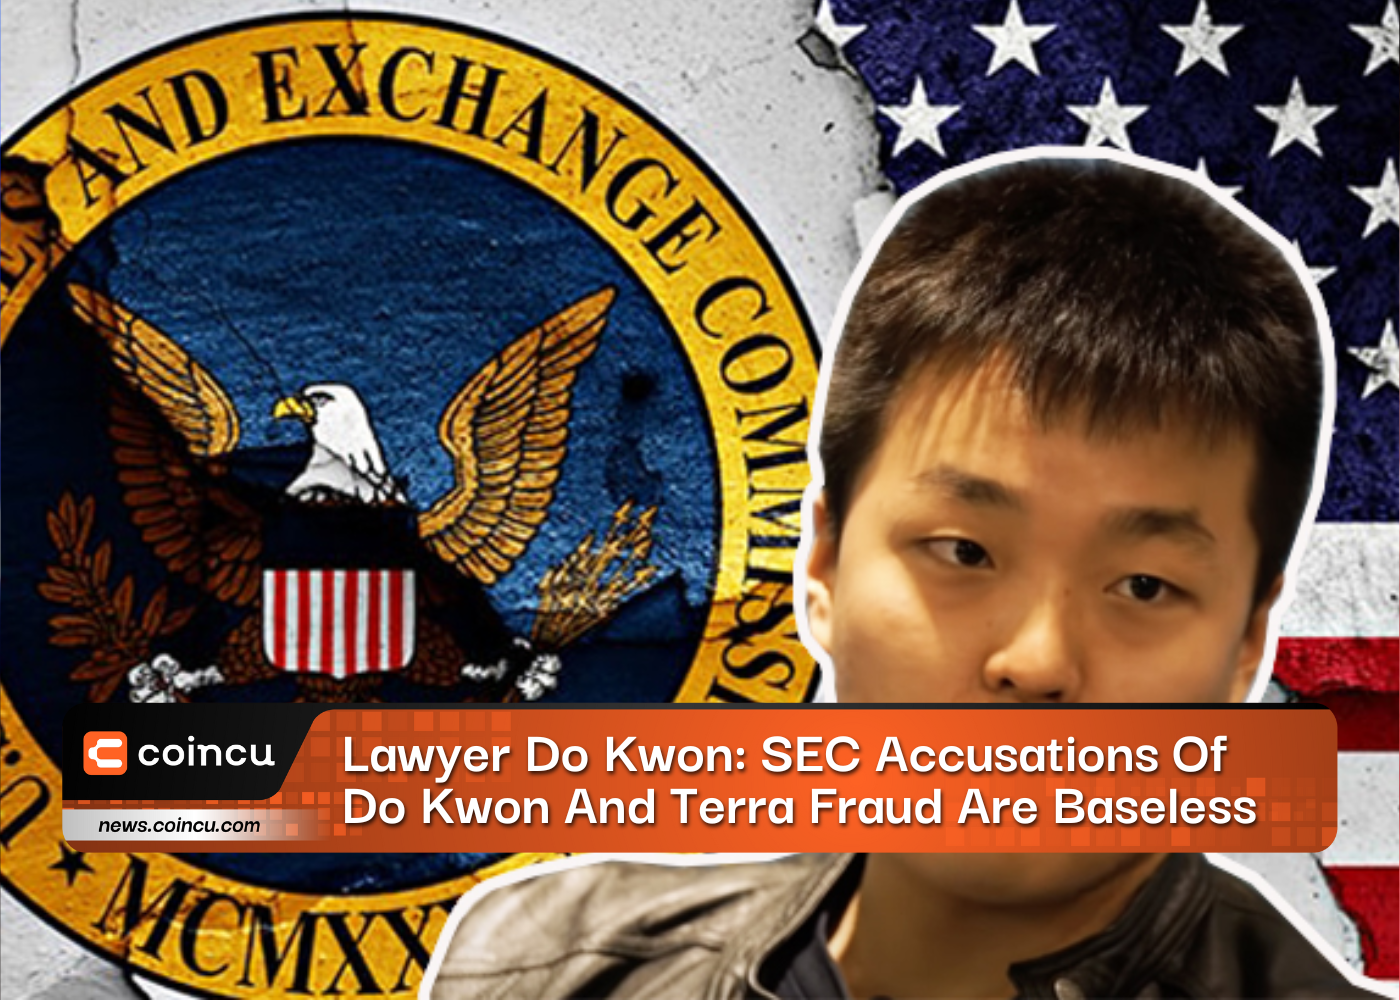 Lawyer Do Kwon: SEC Accusations Of Do Kwon And Terra Fraud Are Baseless